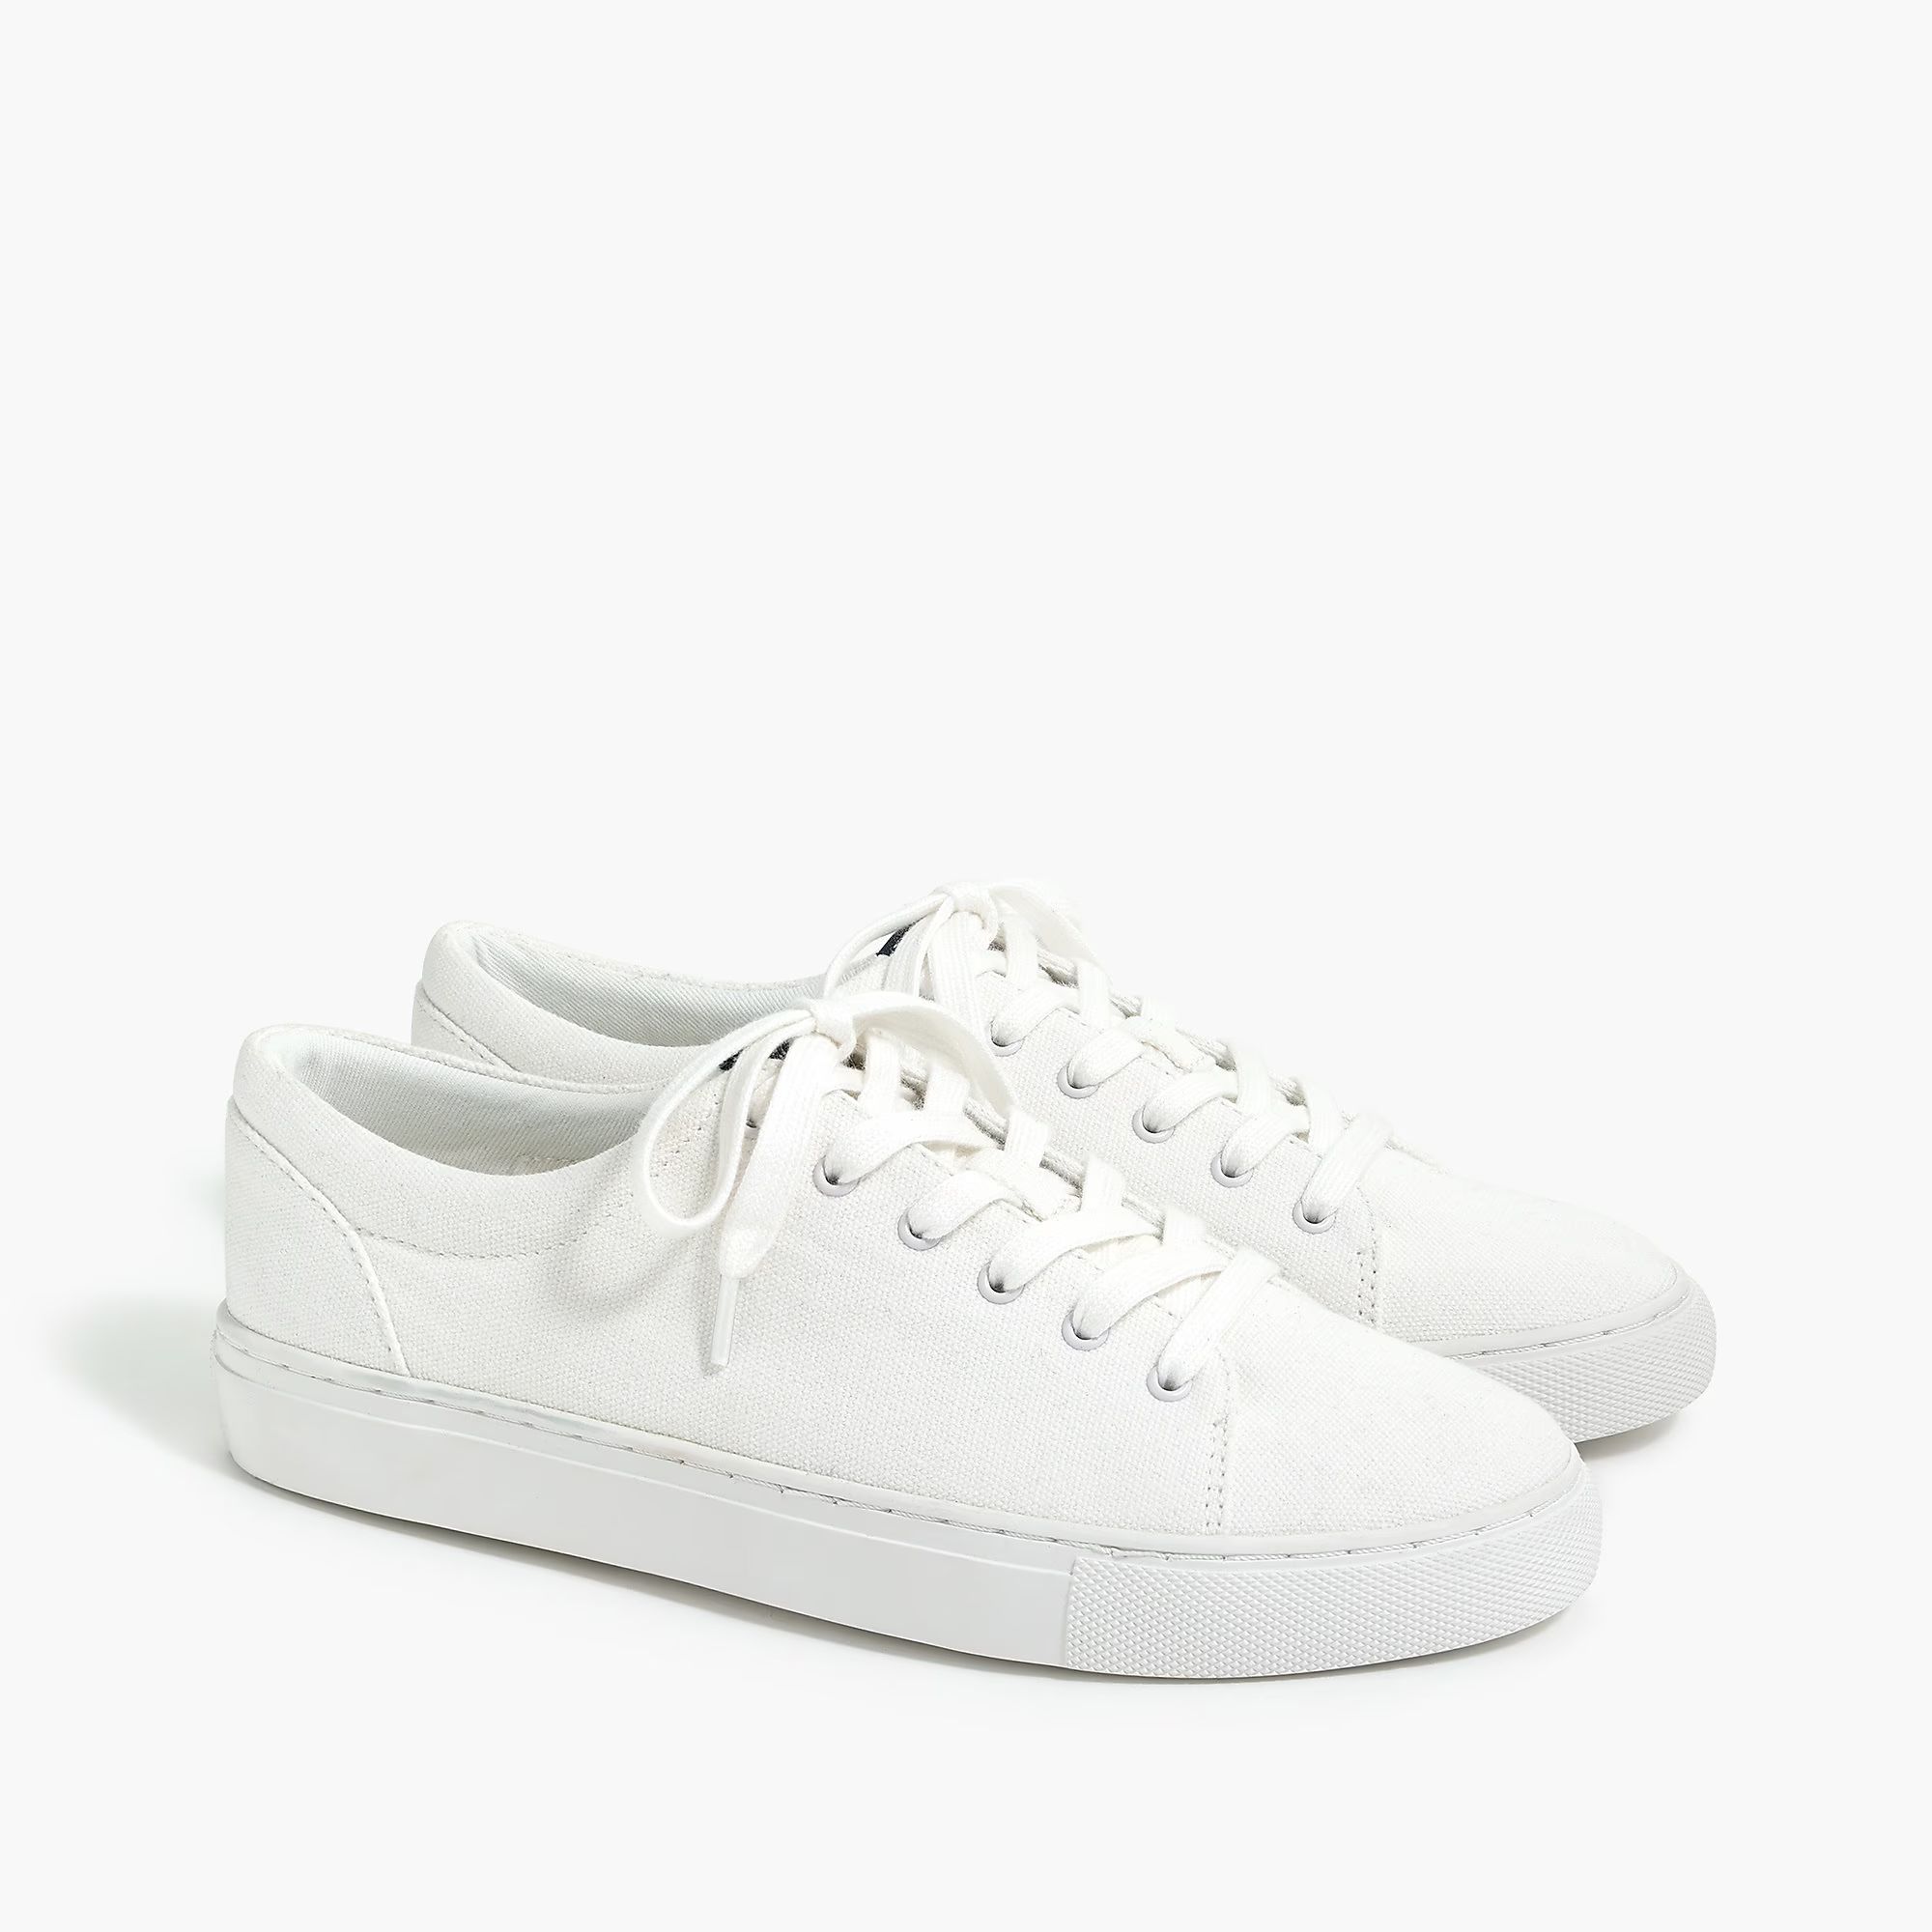 Road trip canvas lace-up sneakers | J.Crew Factory